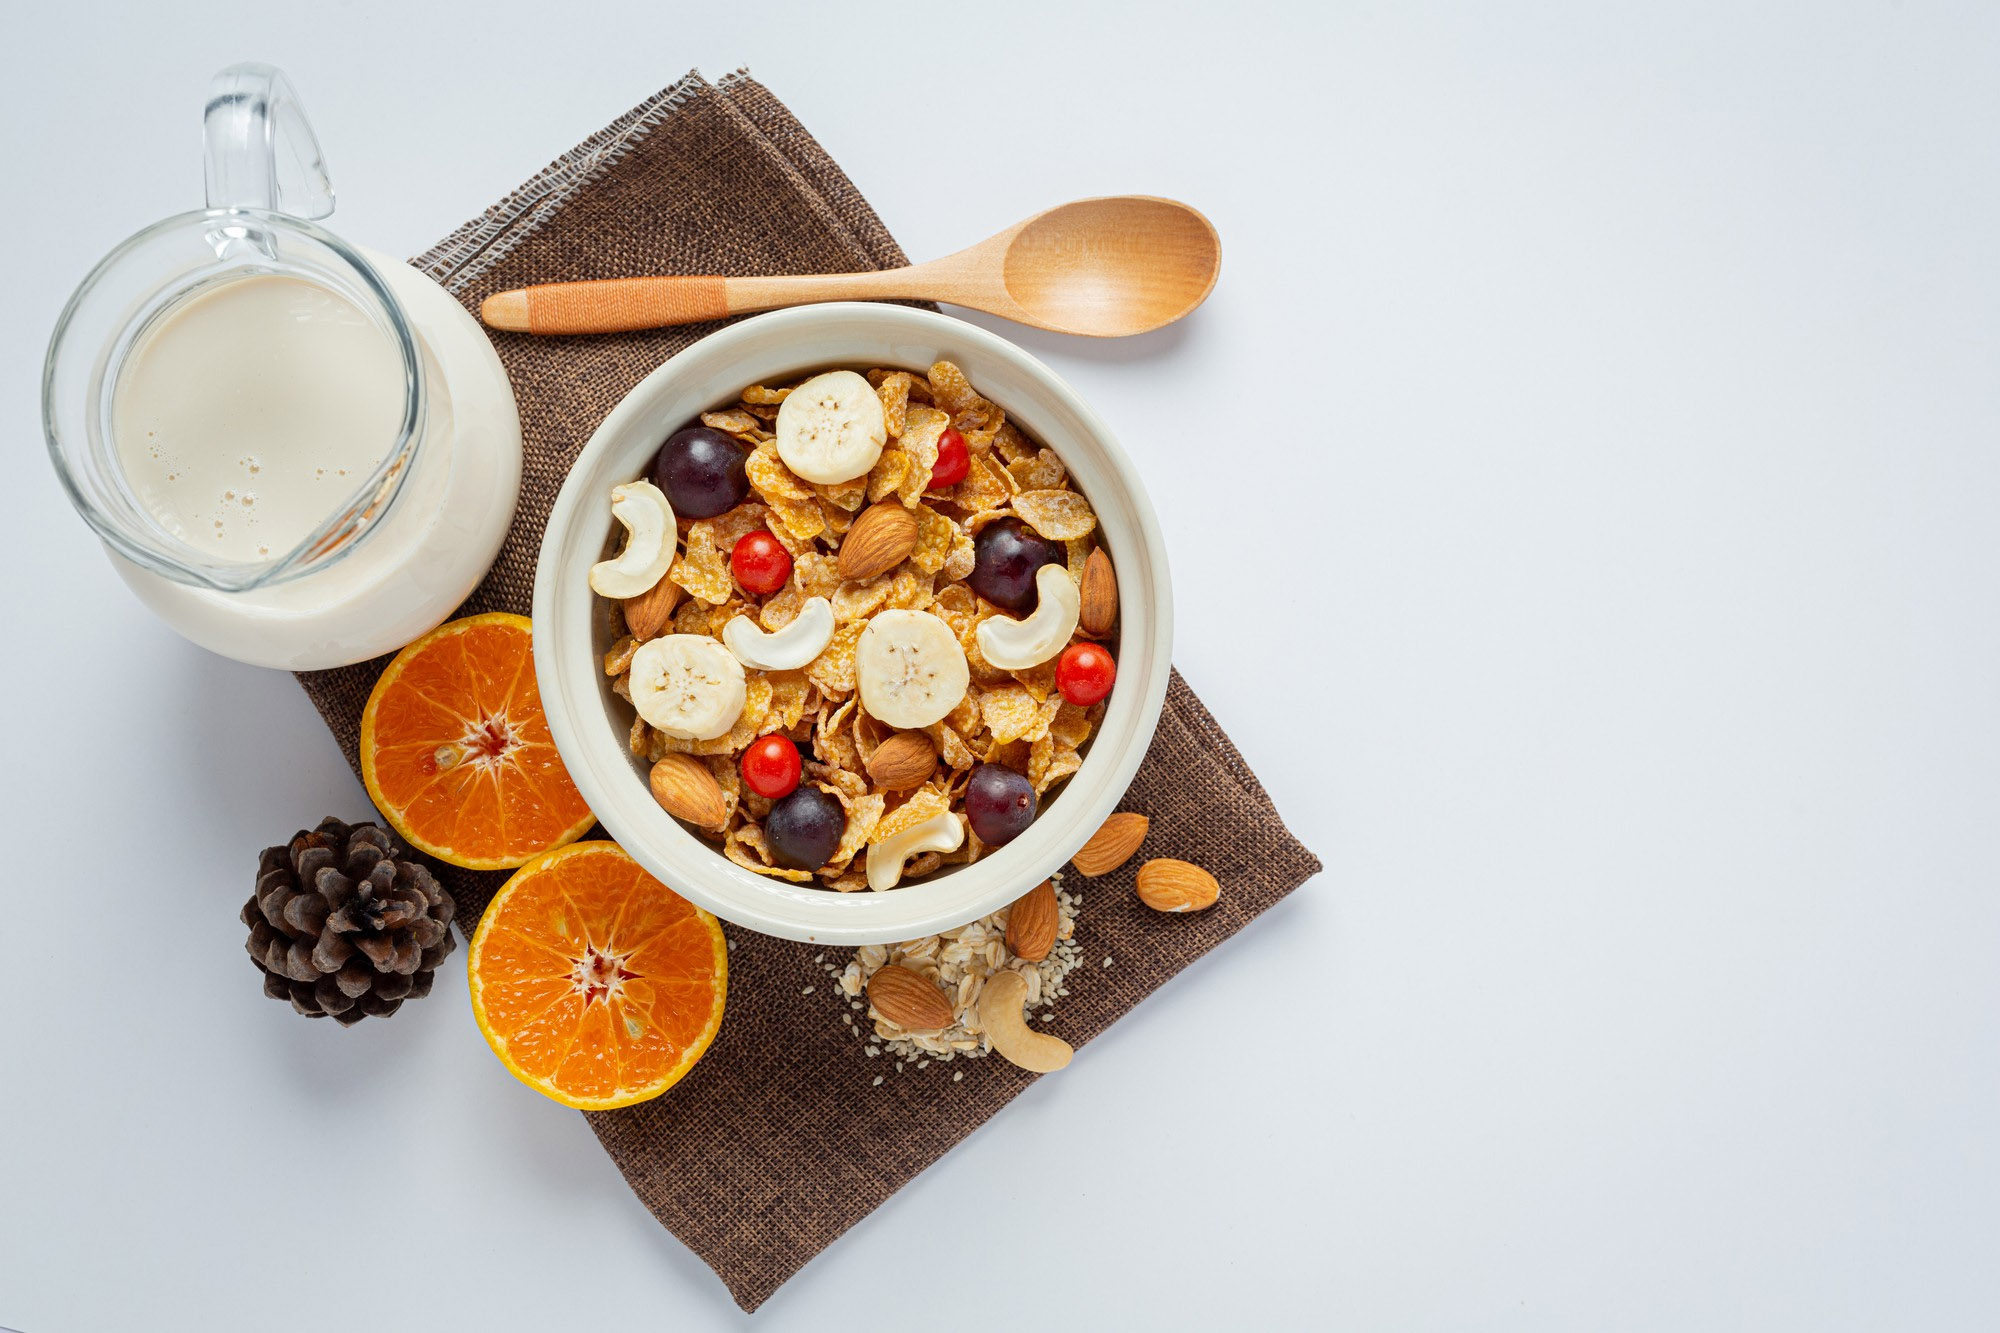 5 Healthy Breakfasts to try with PCOS